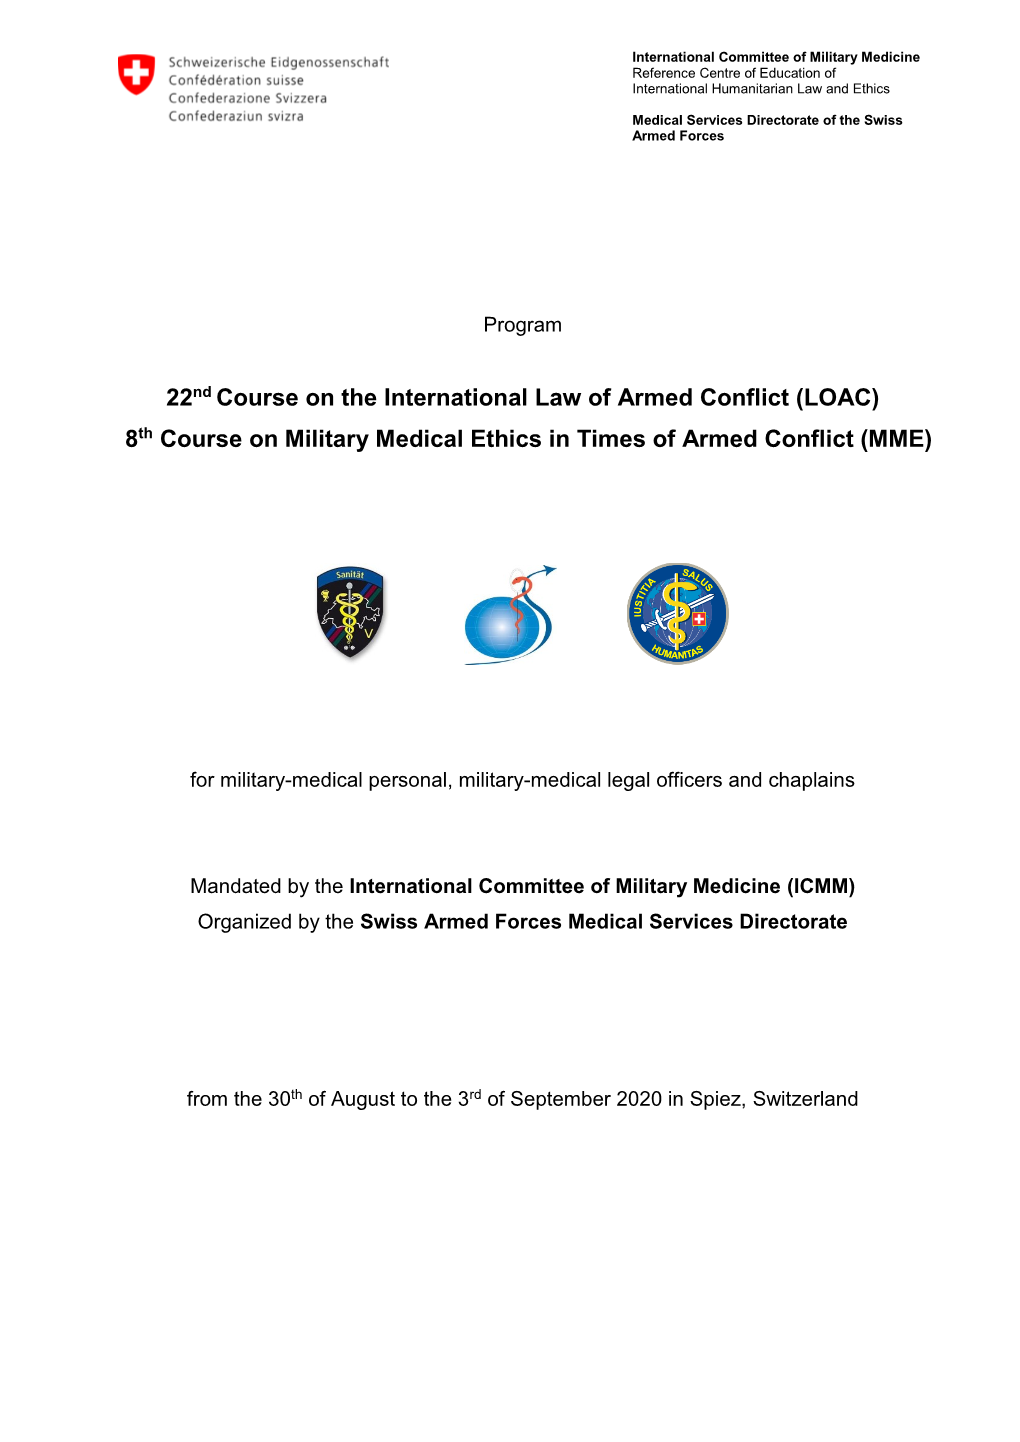 22Nd Course on the International Law of Armed Conflict (LOAC) 8Th Course on Military Medical Ethics in Times of Armed Conflict (MME)